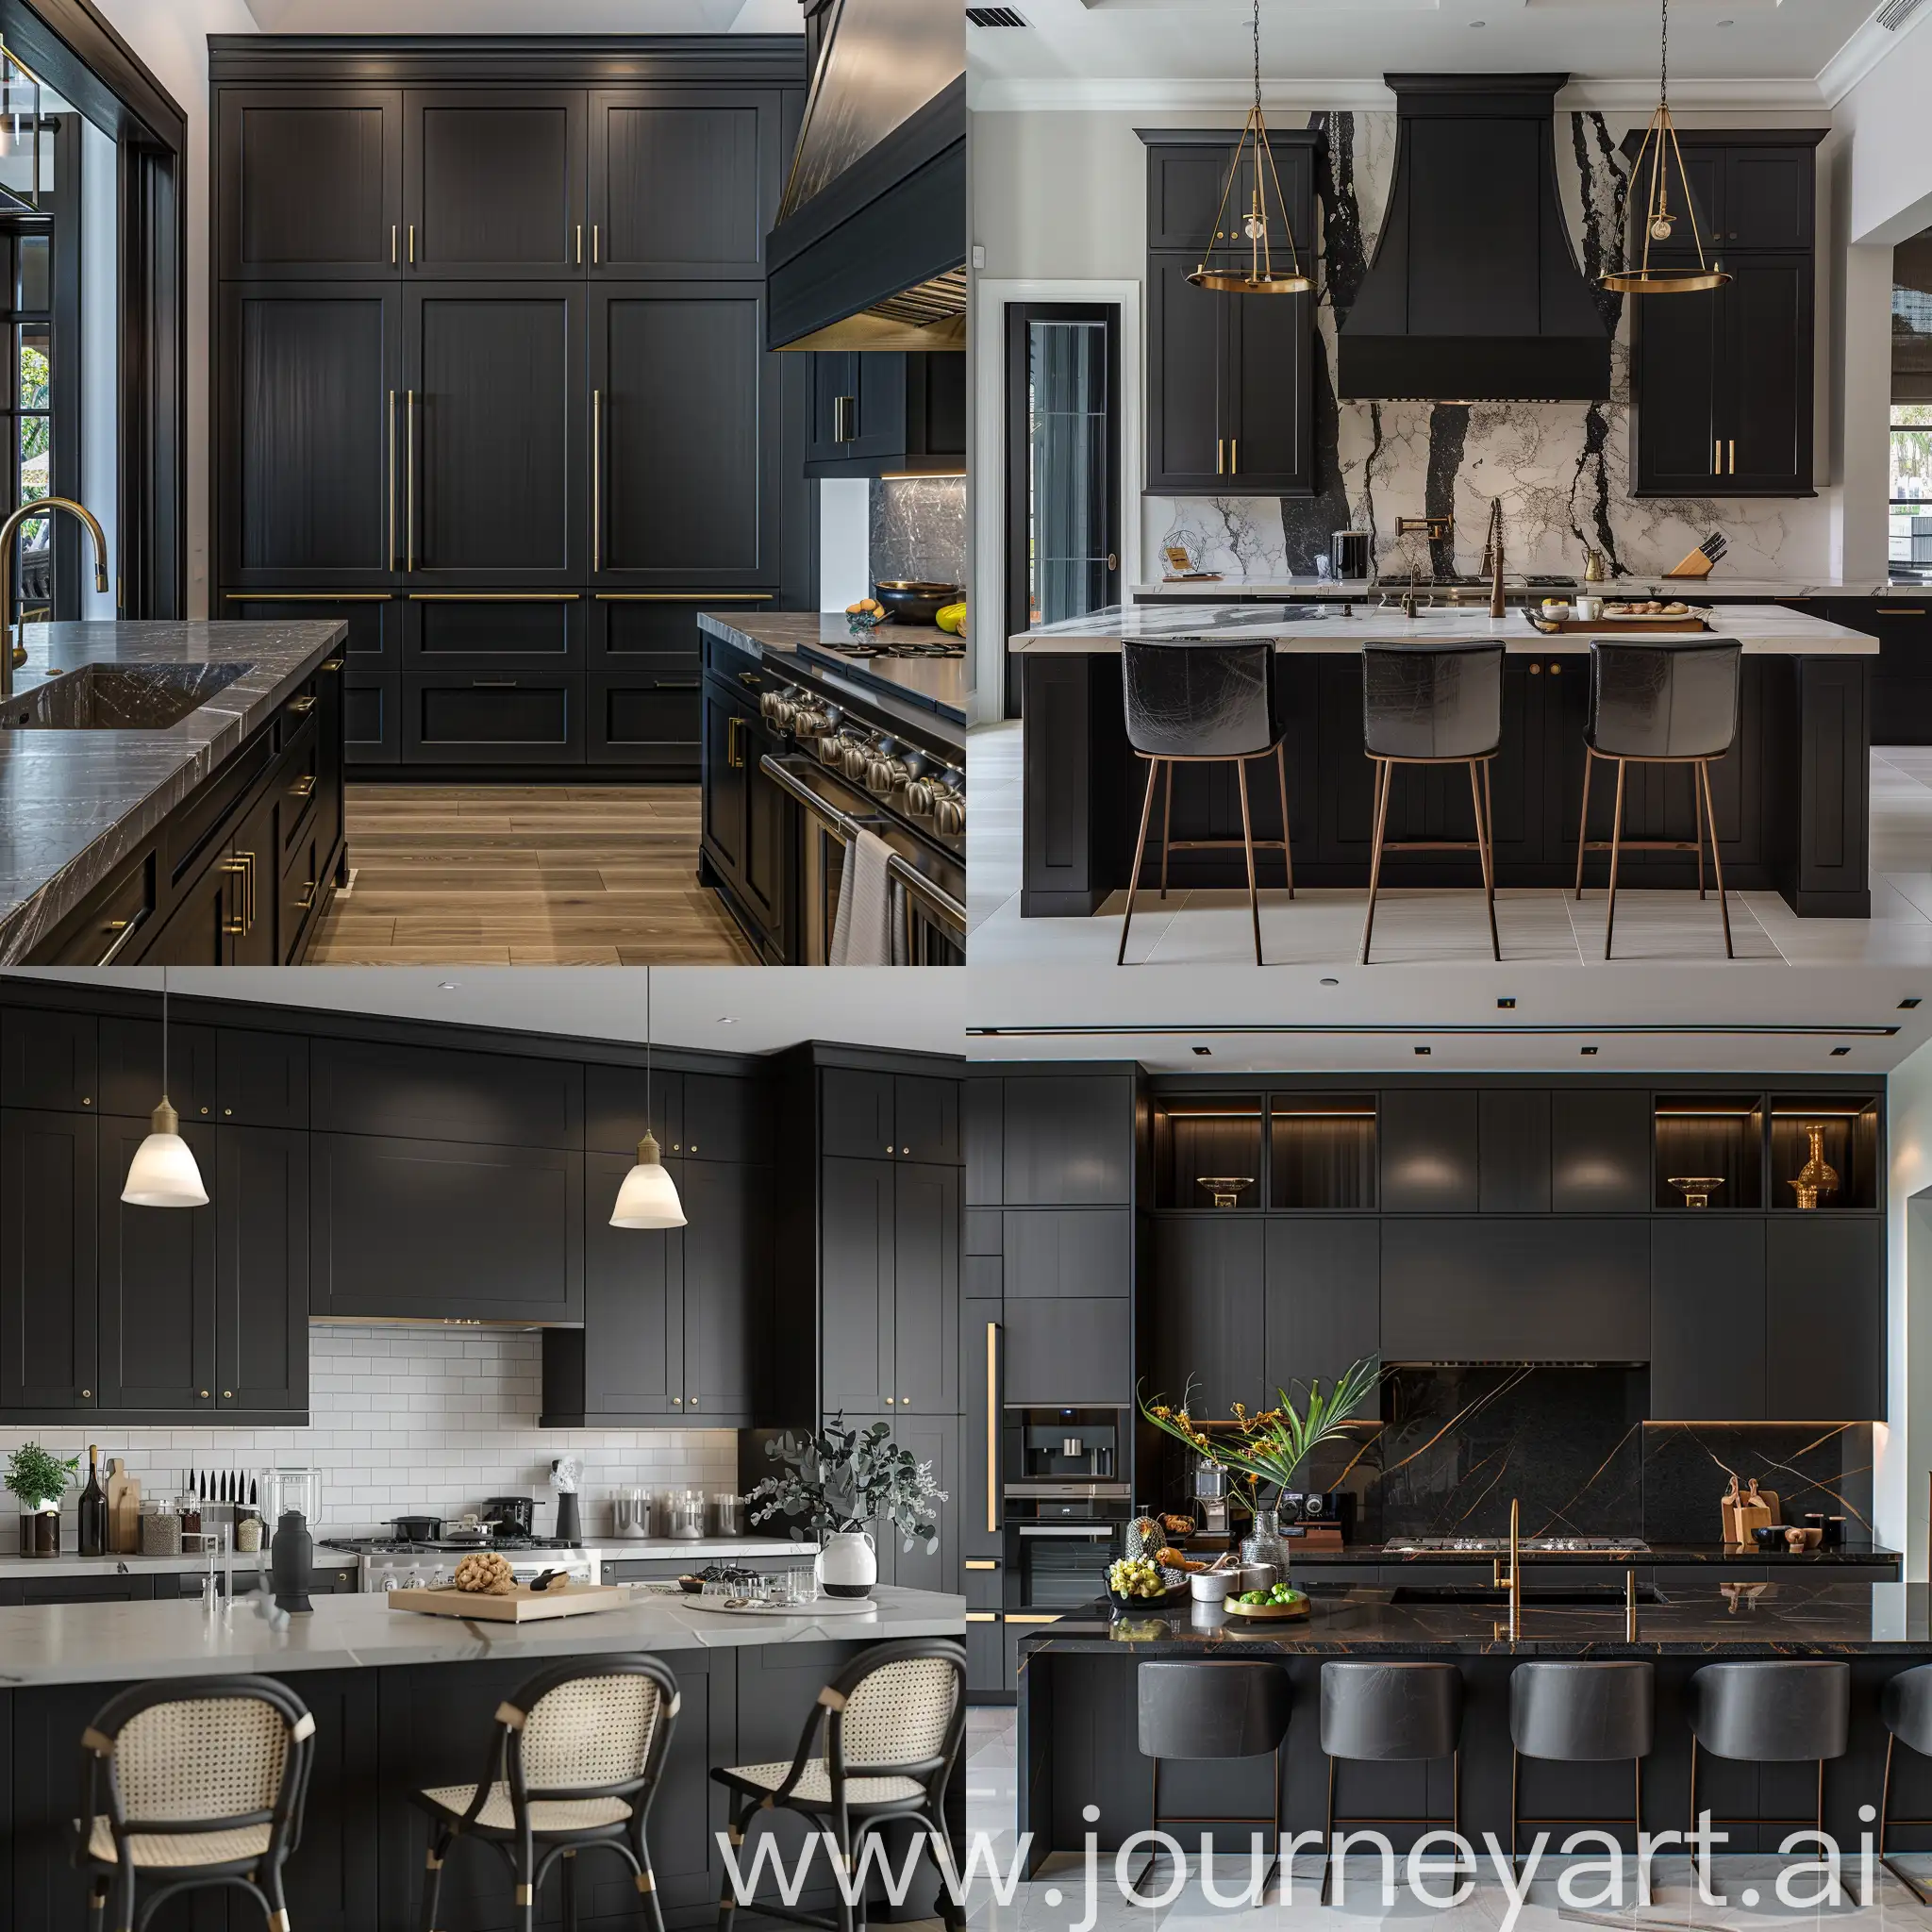 Luxurious-Black-Shaker-Style-Kitchen-Cabinets-in-Florida-HighResolution-HD-Image